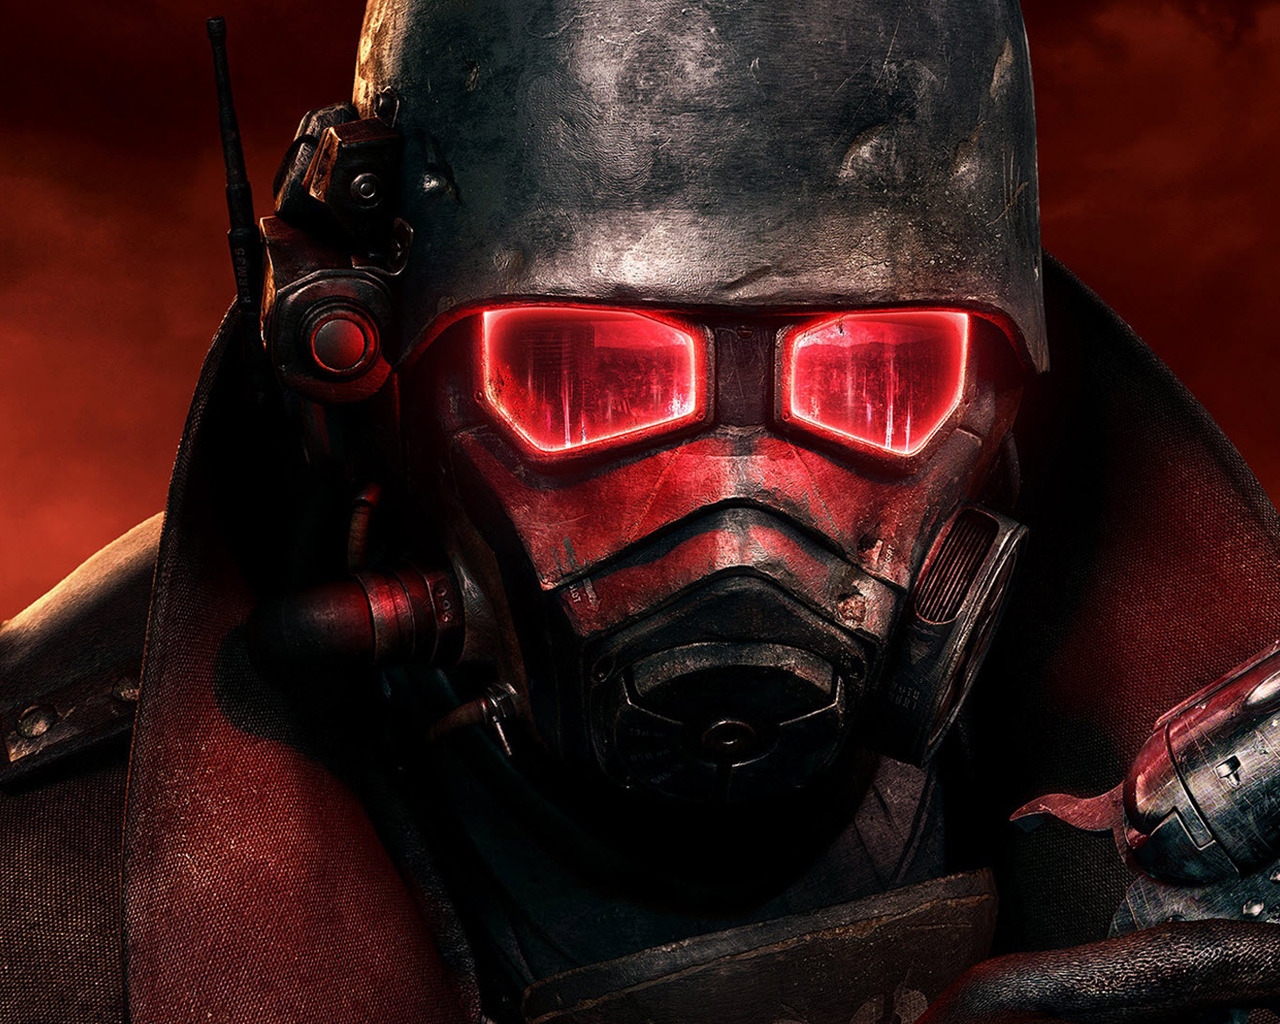 Fallout New Vegas for 1280 x 1024 resolution